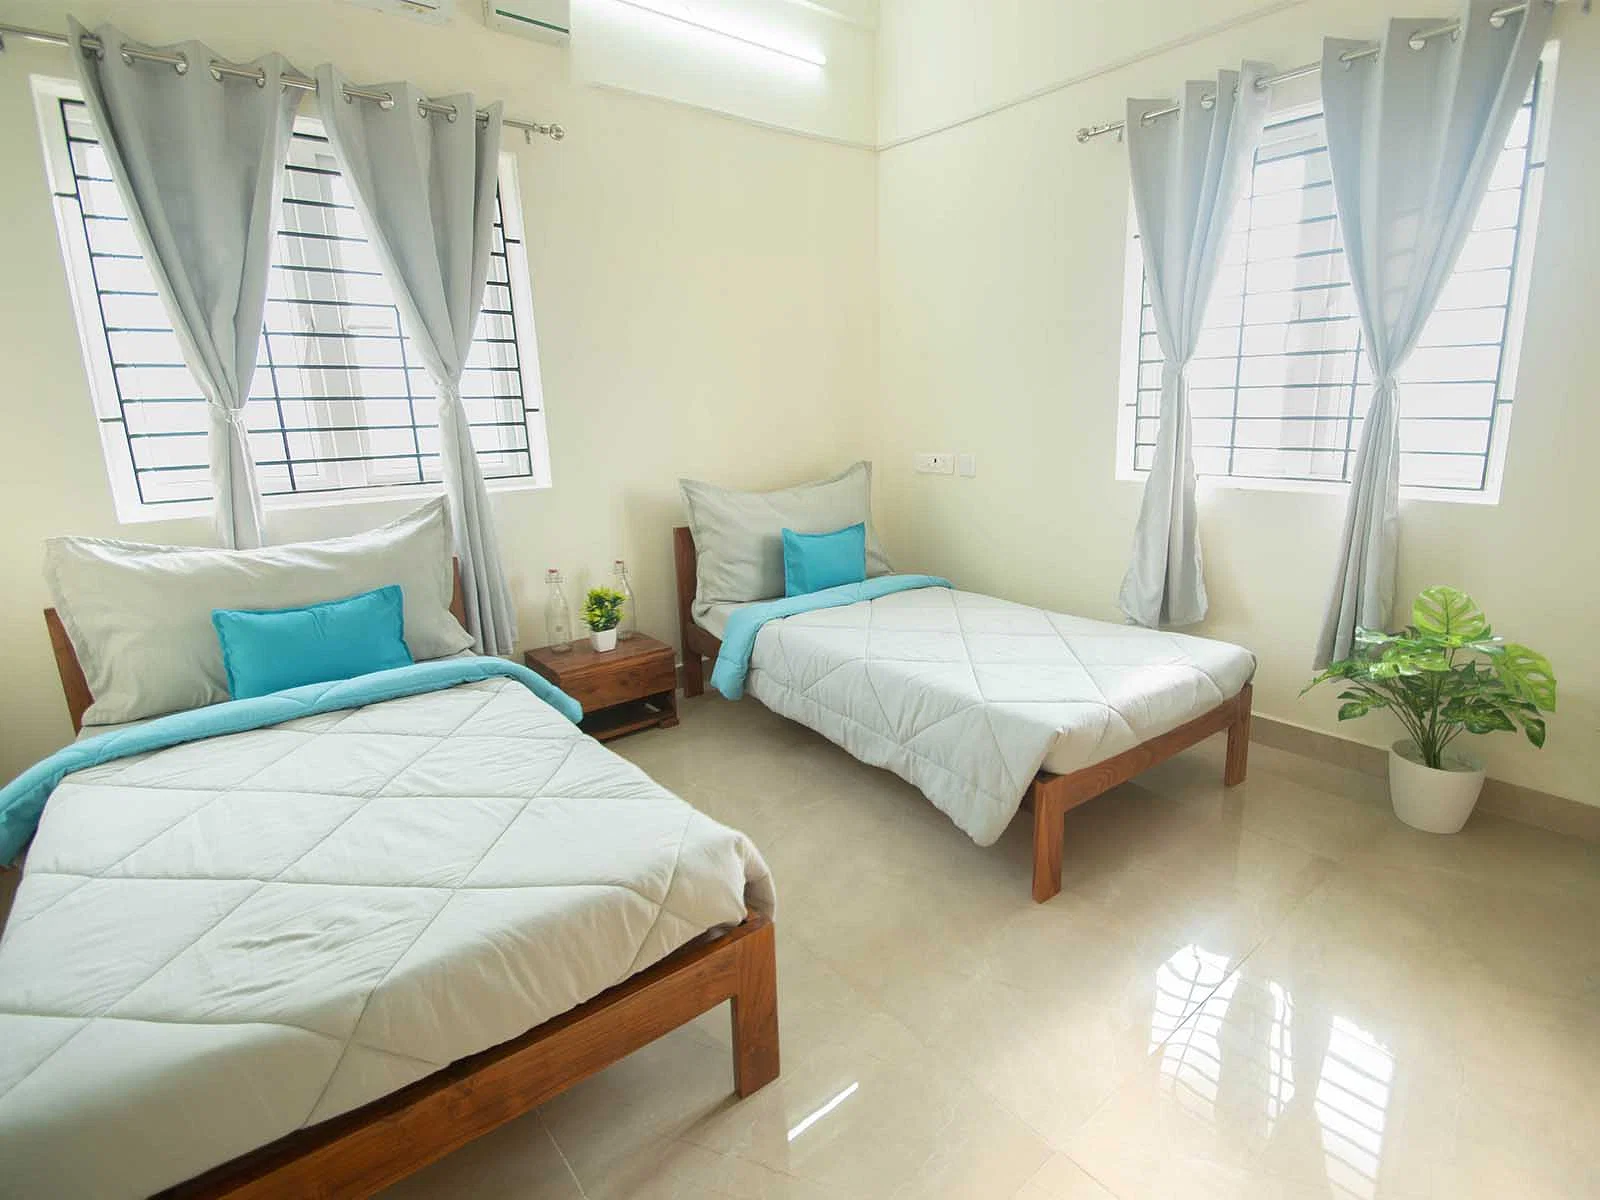 pgs in Porur with Daily housekeeping facilities and free Wi-Fi-Zolo Ironwood